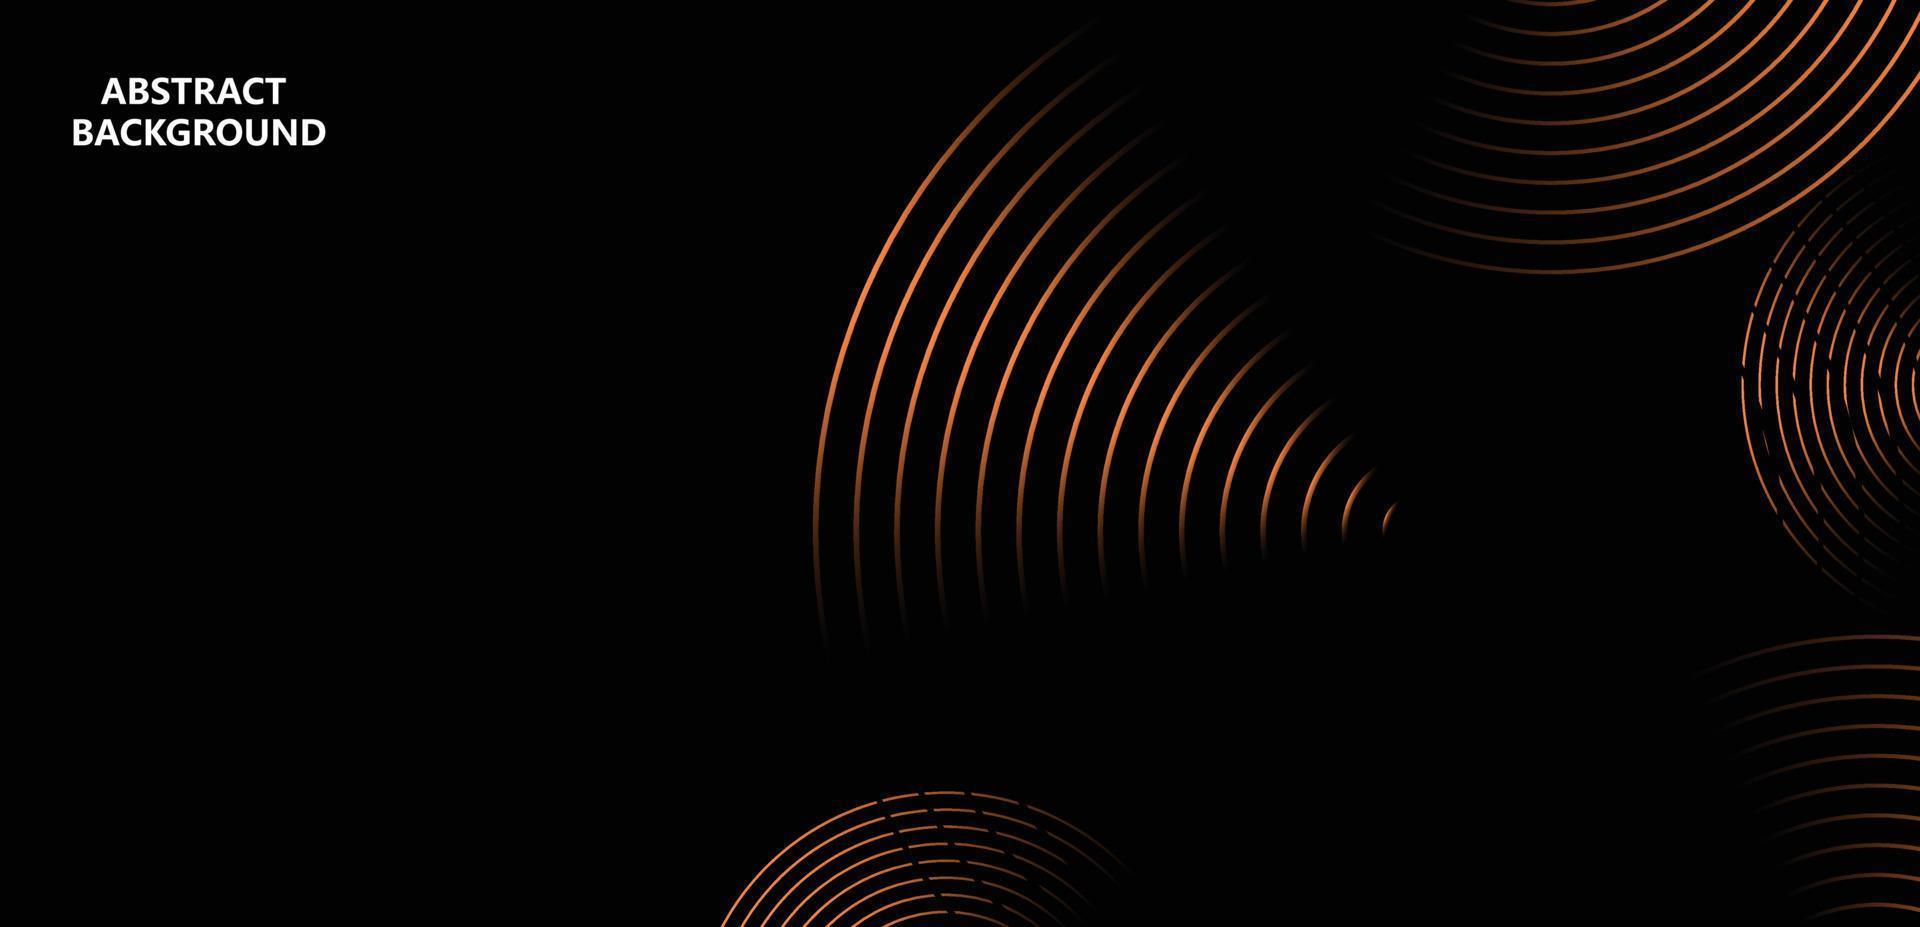 Abstract glowing circle lines on dark background. Futuristic technology concept. Horizontal banner template. Suit for poster, cover, banner, brochure, website vector